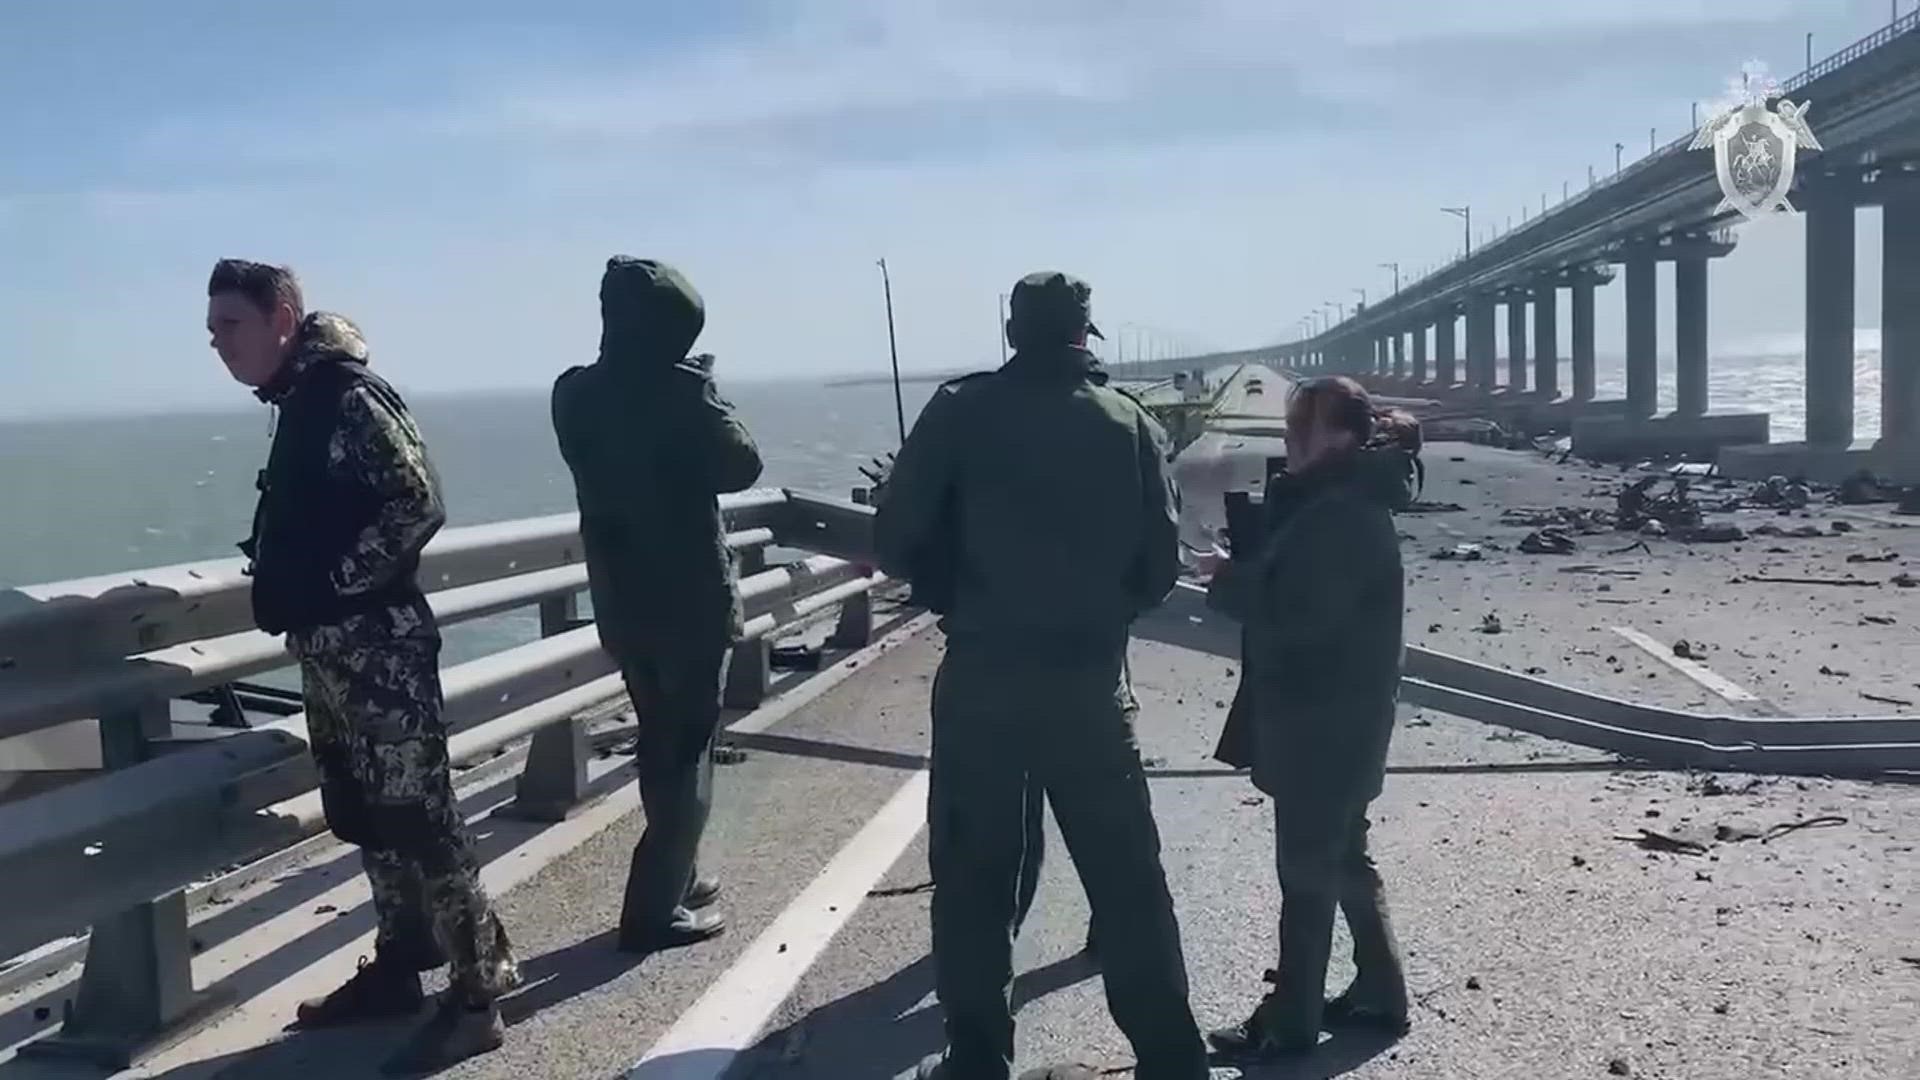 Ukrainian officials have repeatedly threatened to strike the bridge and some lauded the attack, but Kyiv stopped short of claiming responsibility.